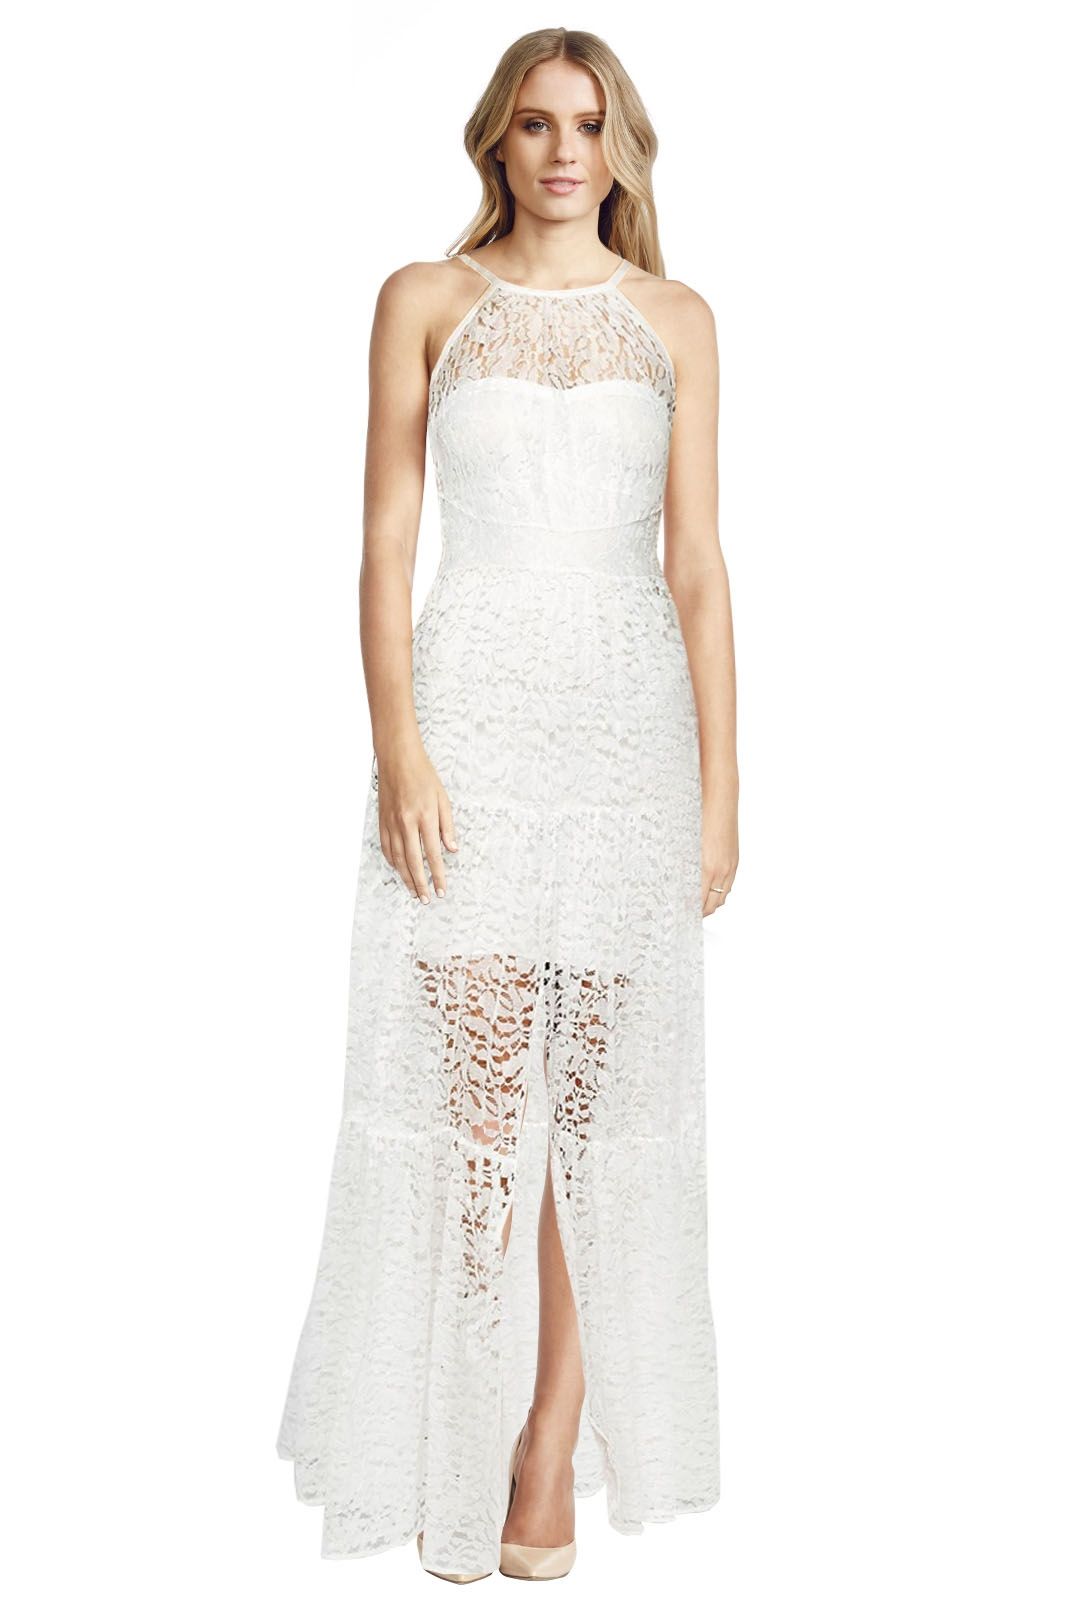 Body Frock - Brides Tiered Lace Dress - White - Front